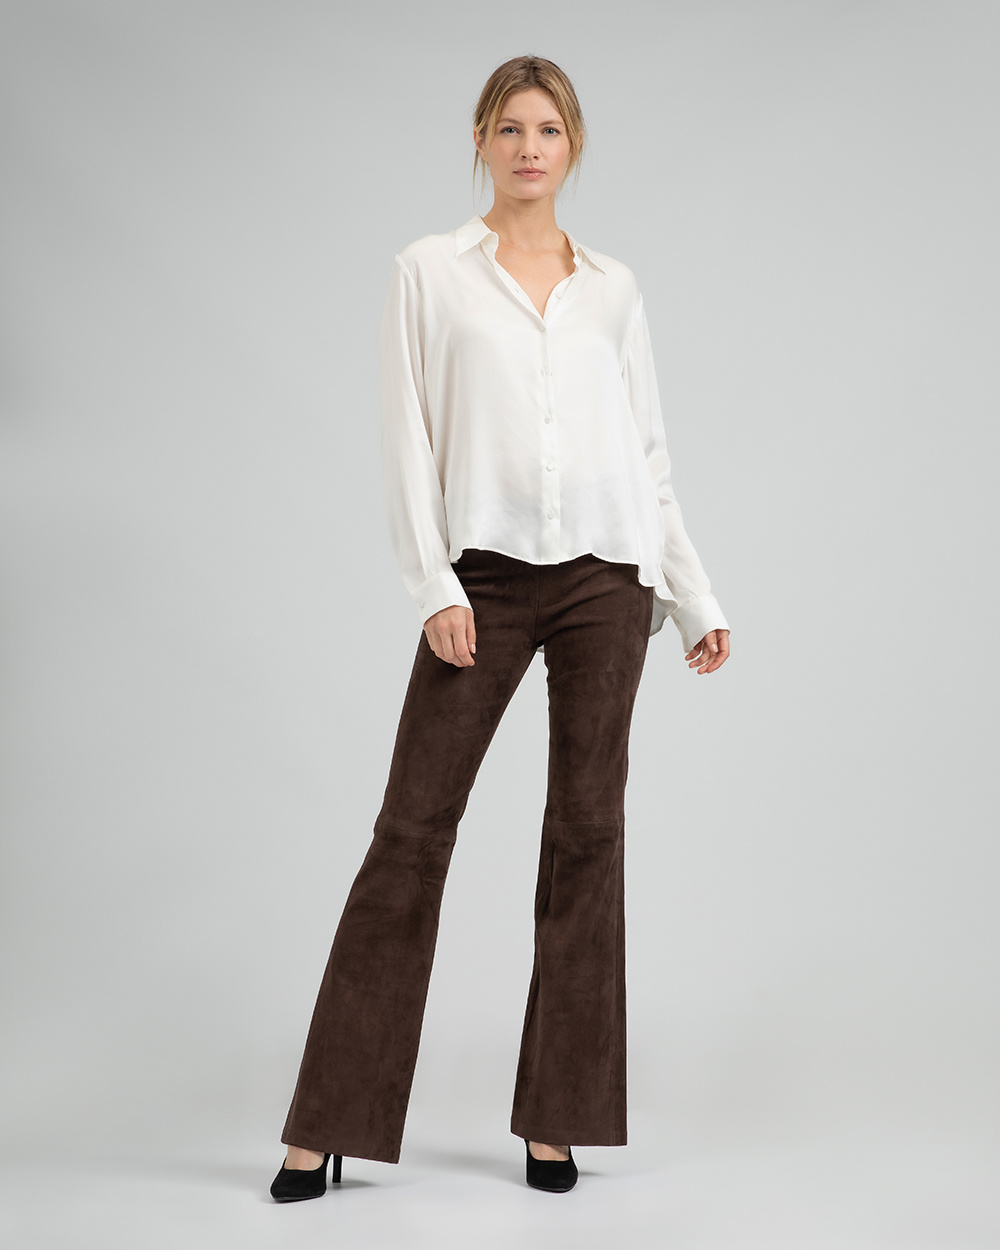 Fringe Suede Leather Pant | Premium Quality Suede Leather